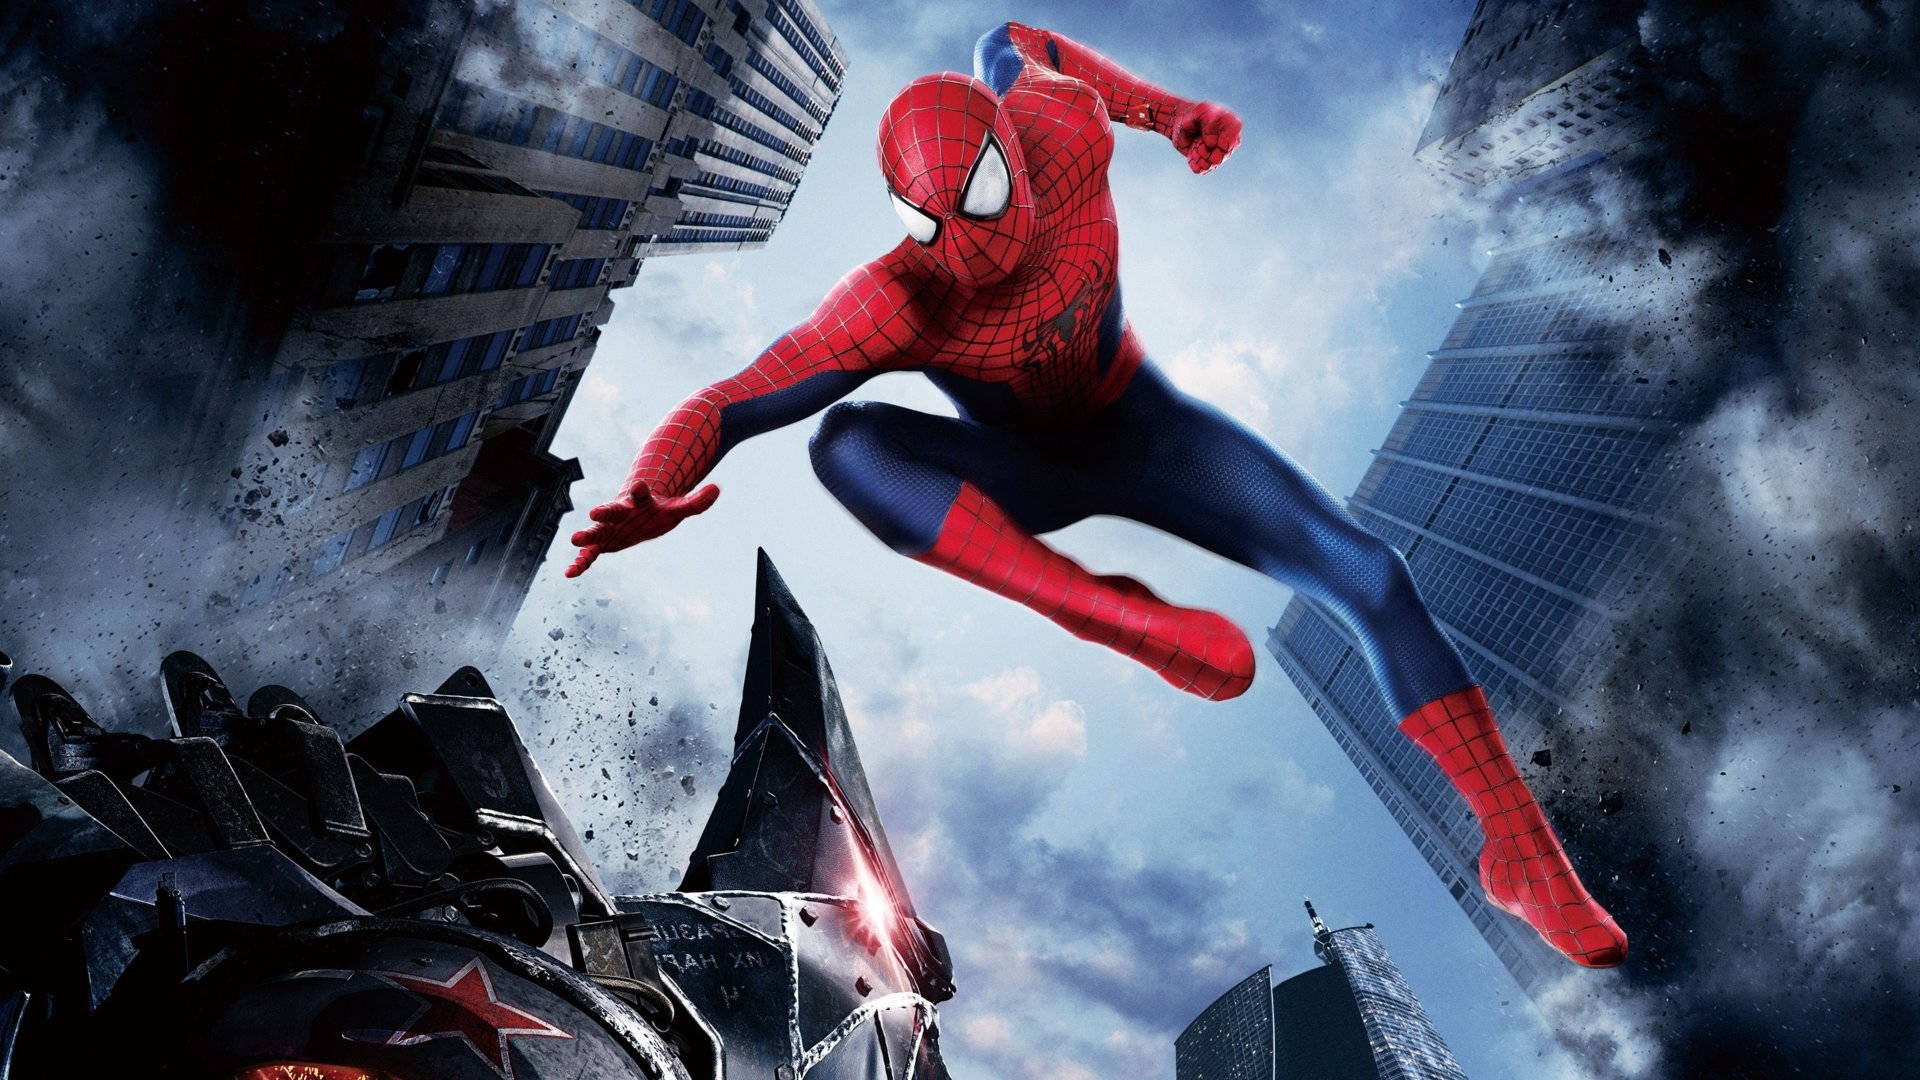 Spider Man In The Air 4k